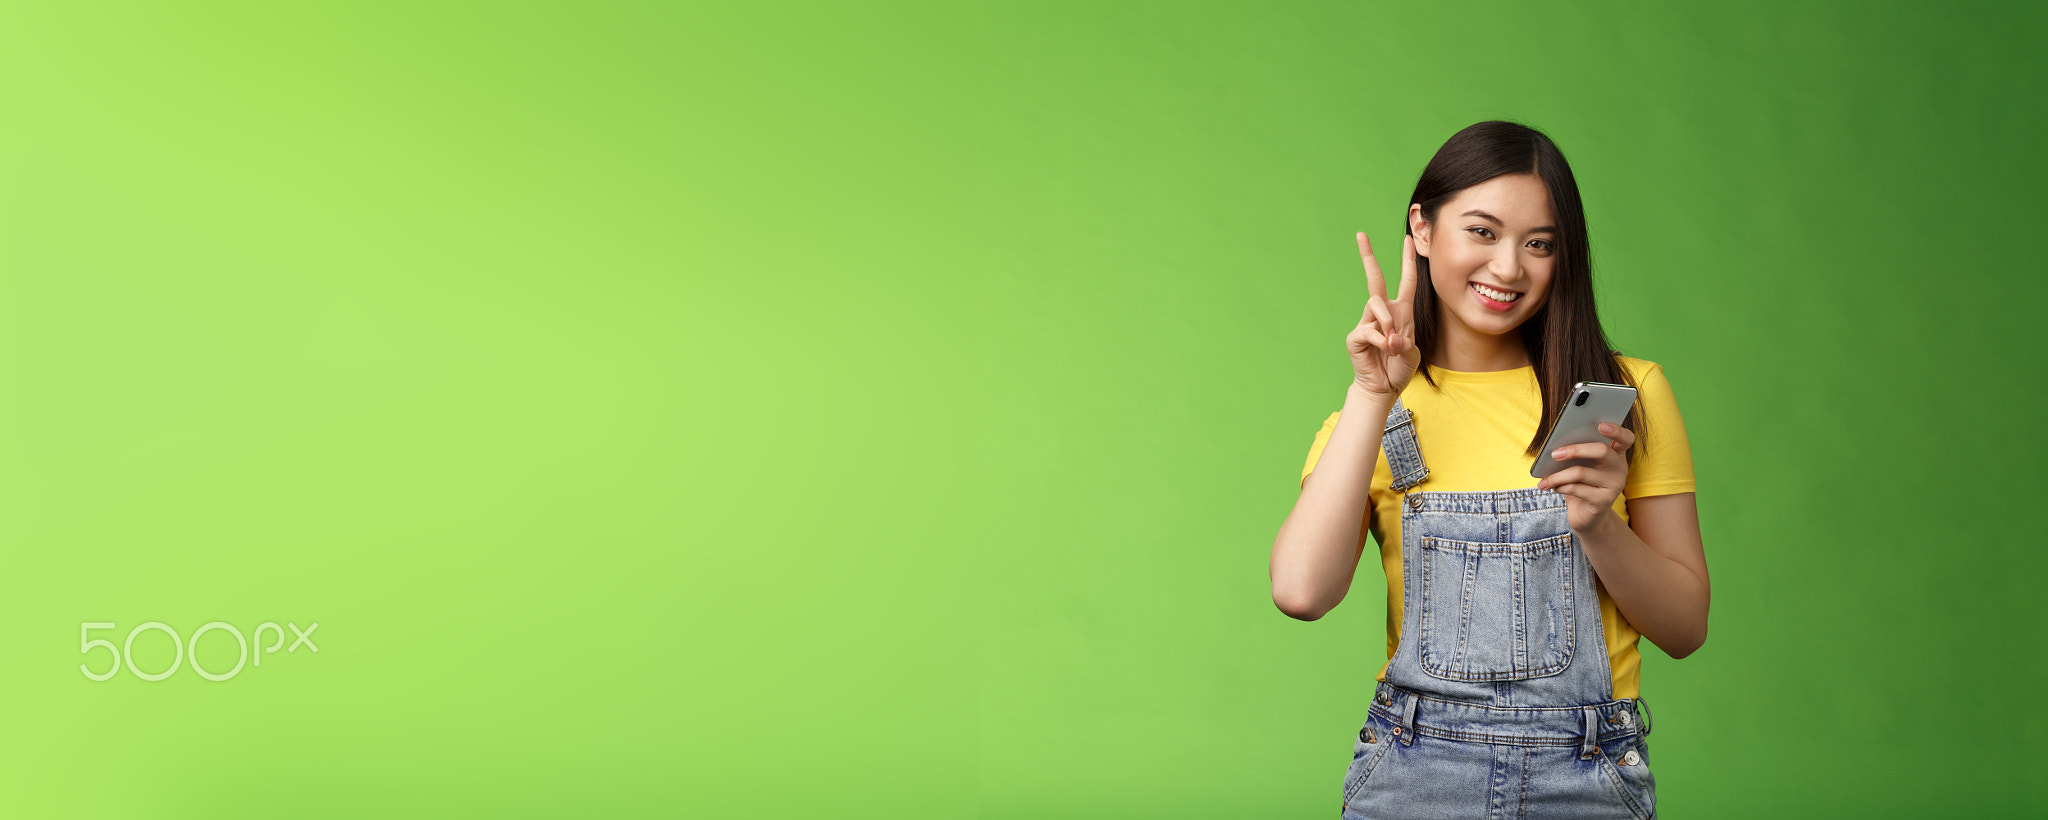 Cute tender asian woman hold smartphone, show victory peace sign, look